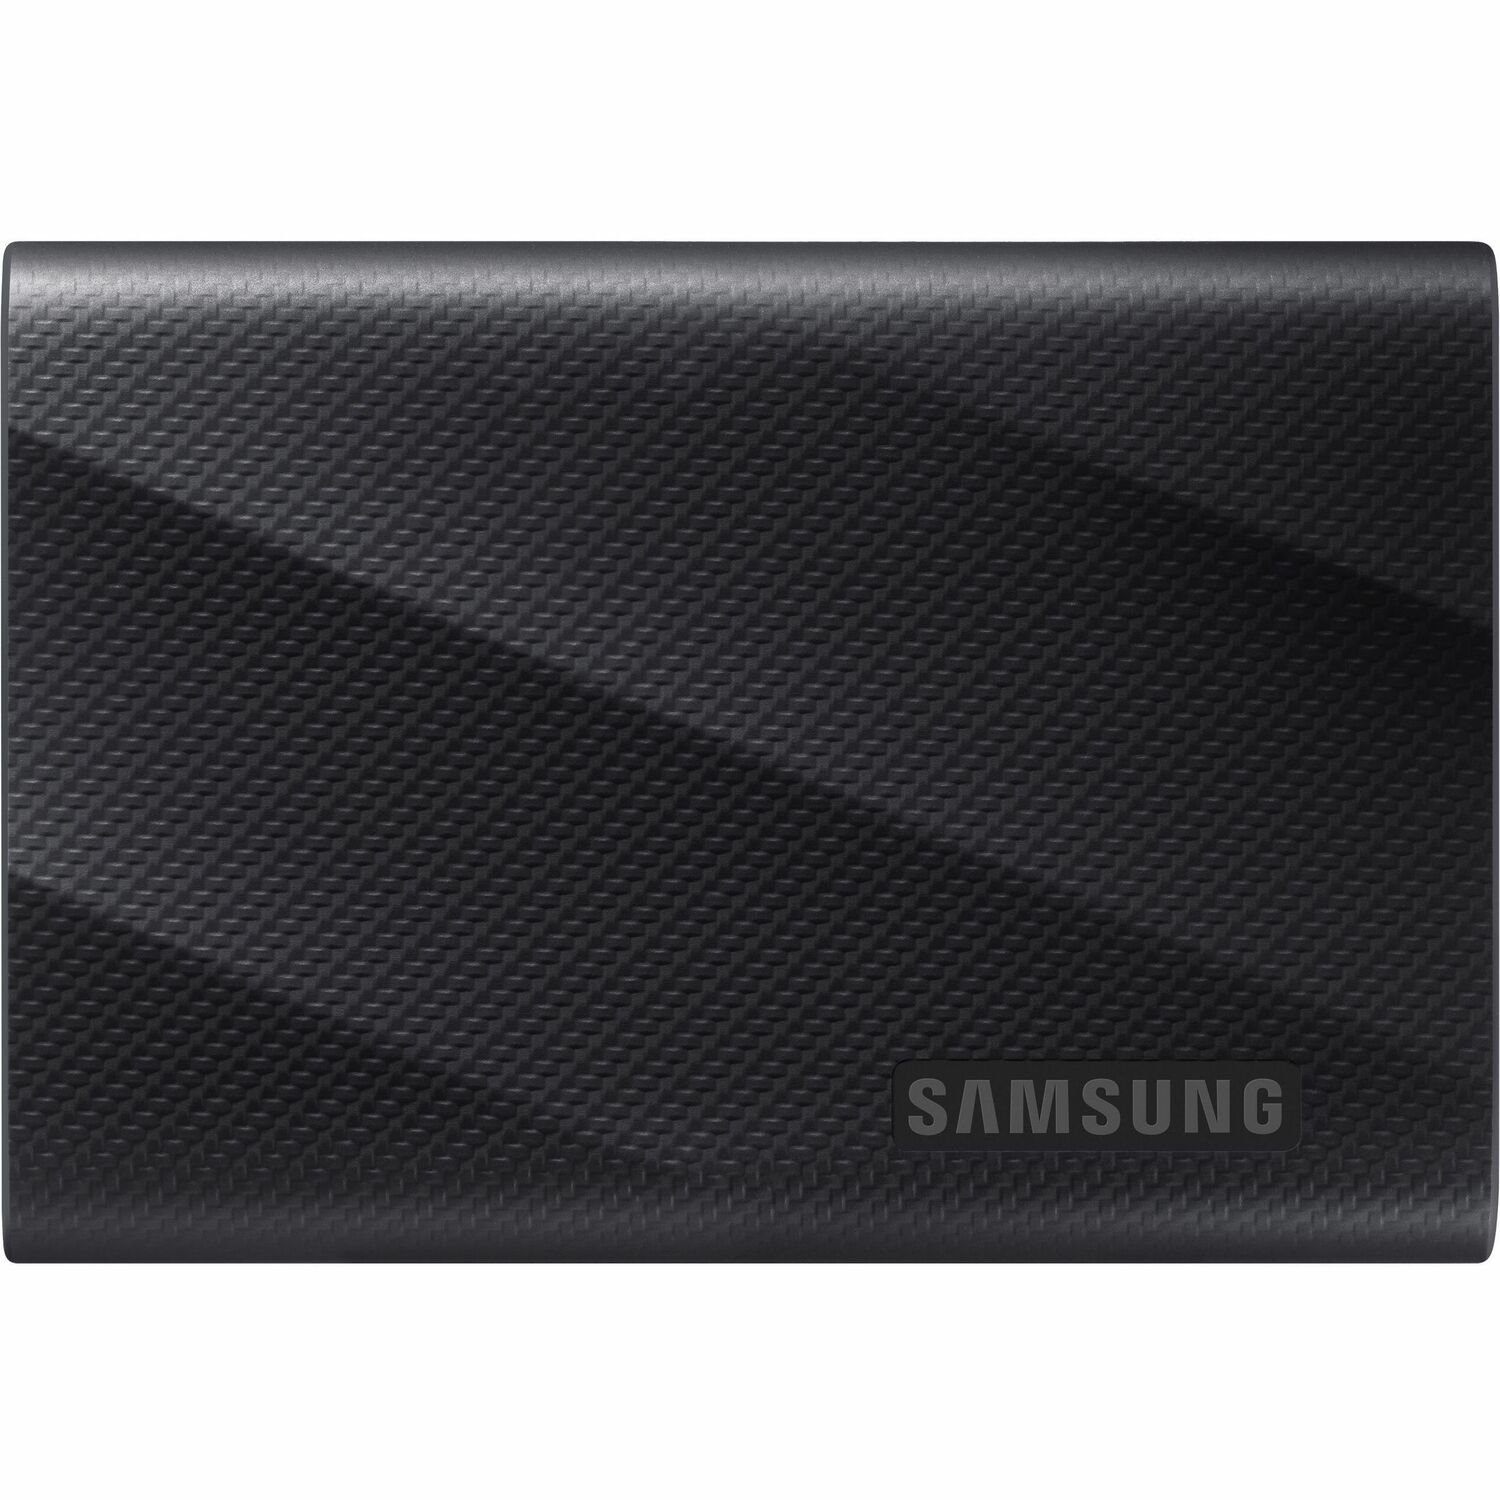 Samsung T9 4 TB Portable Solid State Drive - External - Black